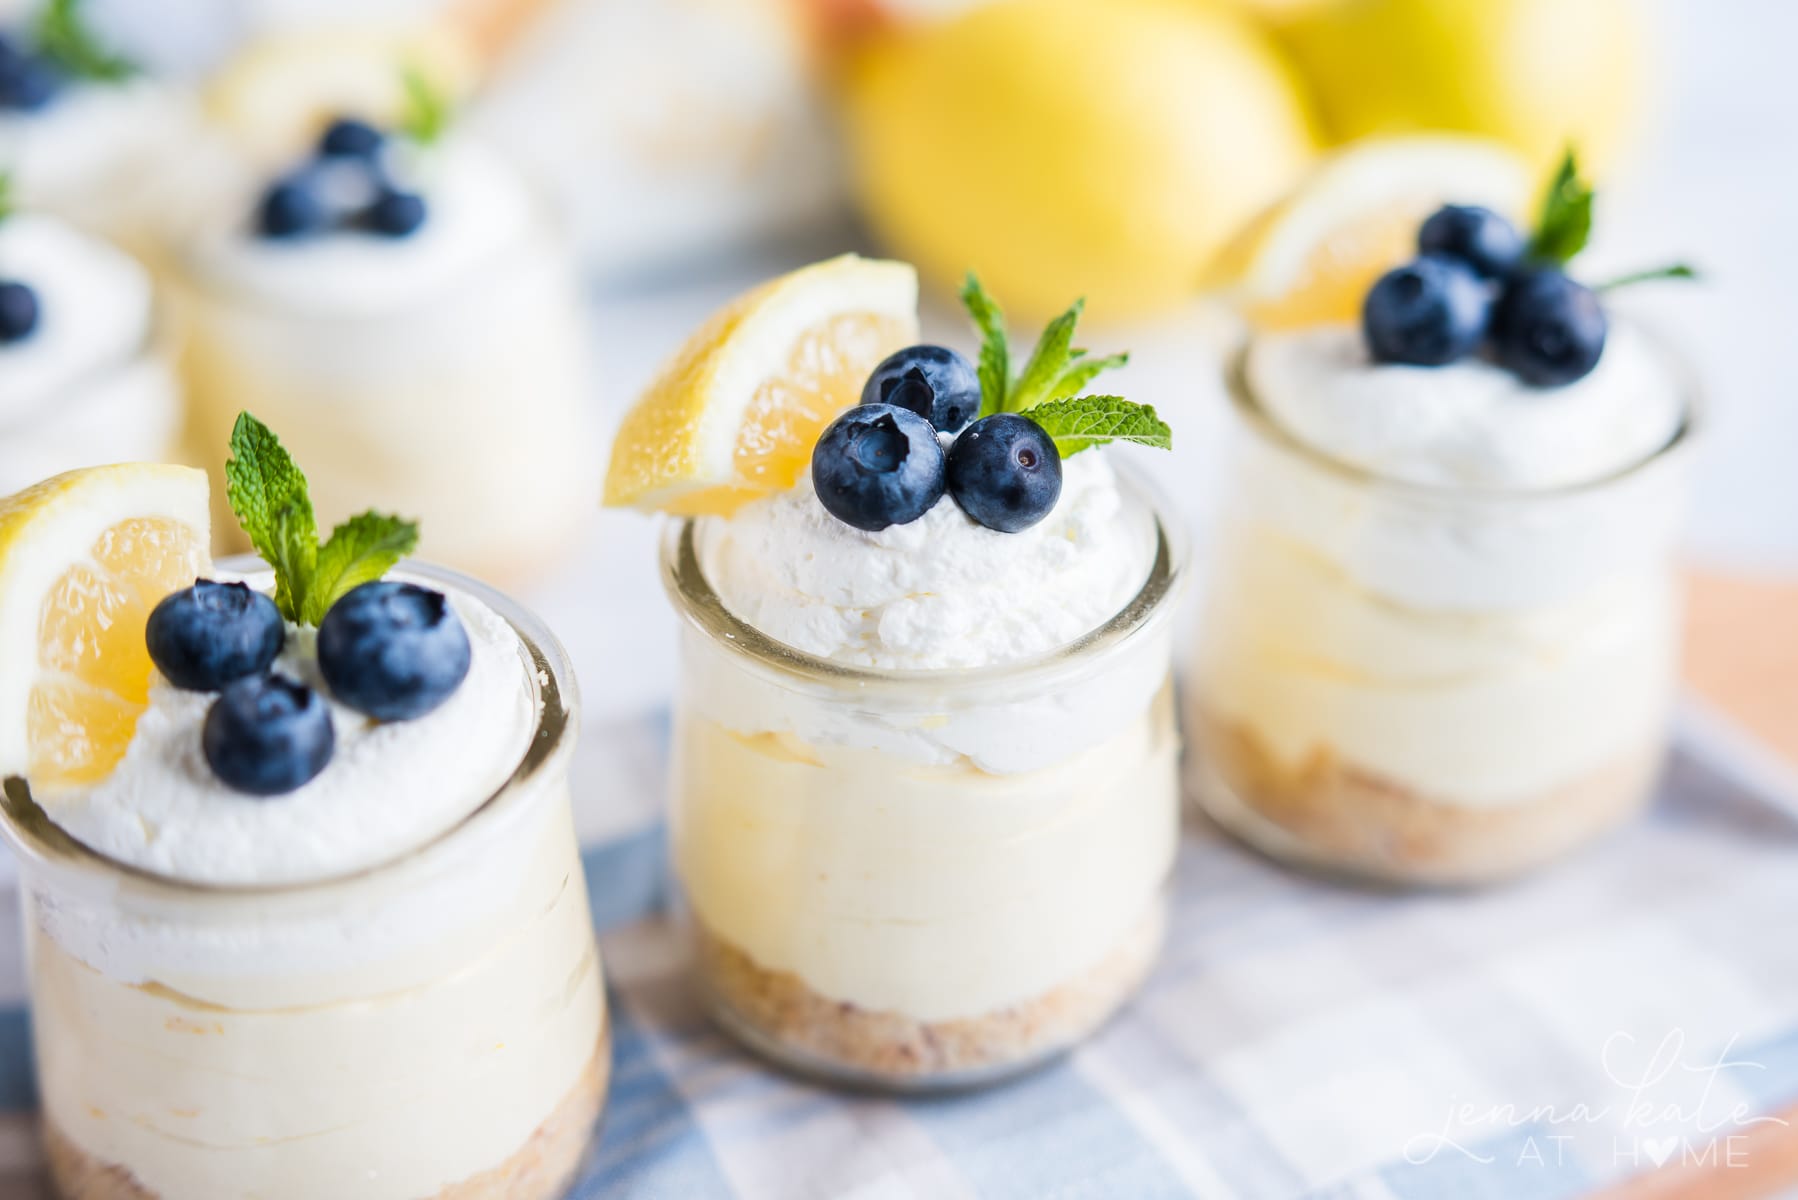 Trio of lemon mousse cheesecakes made with lemon curd